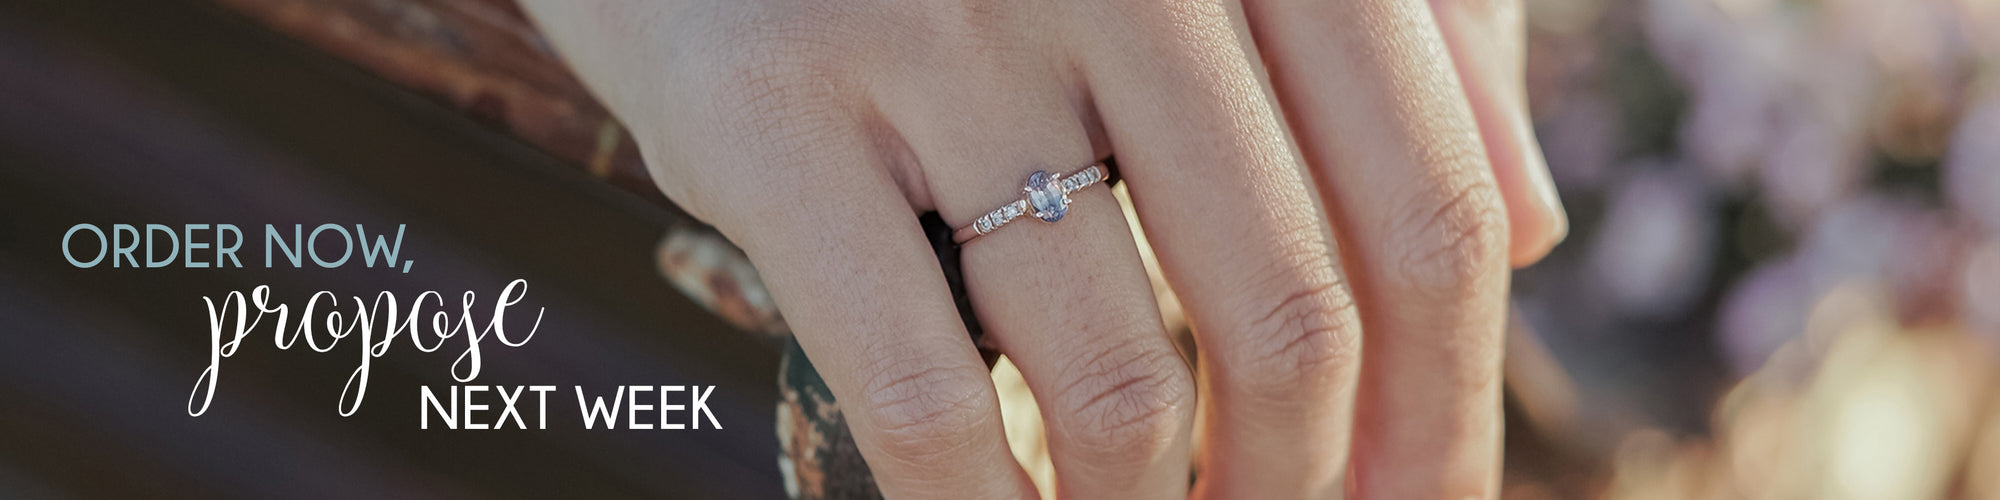 Ethical Engagement Rings